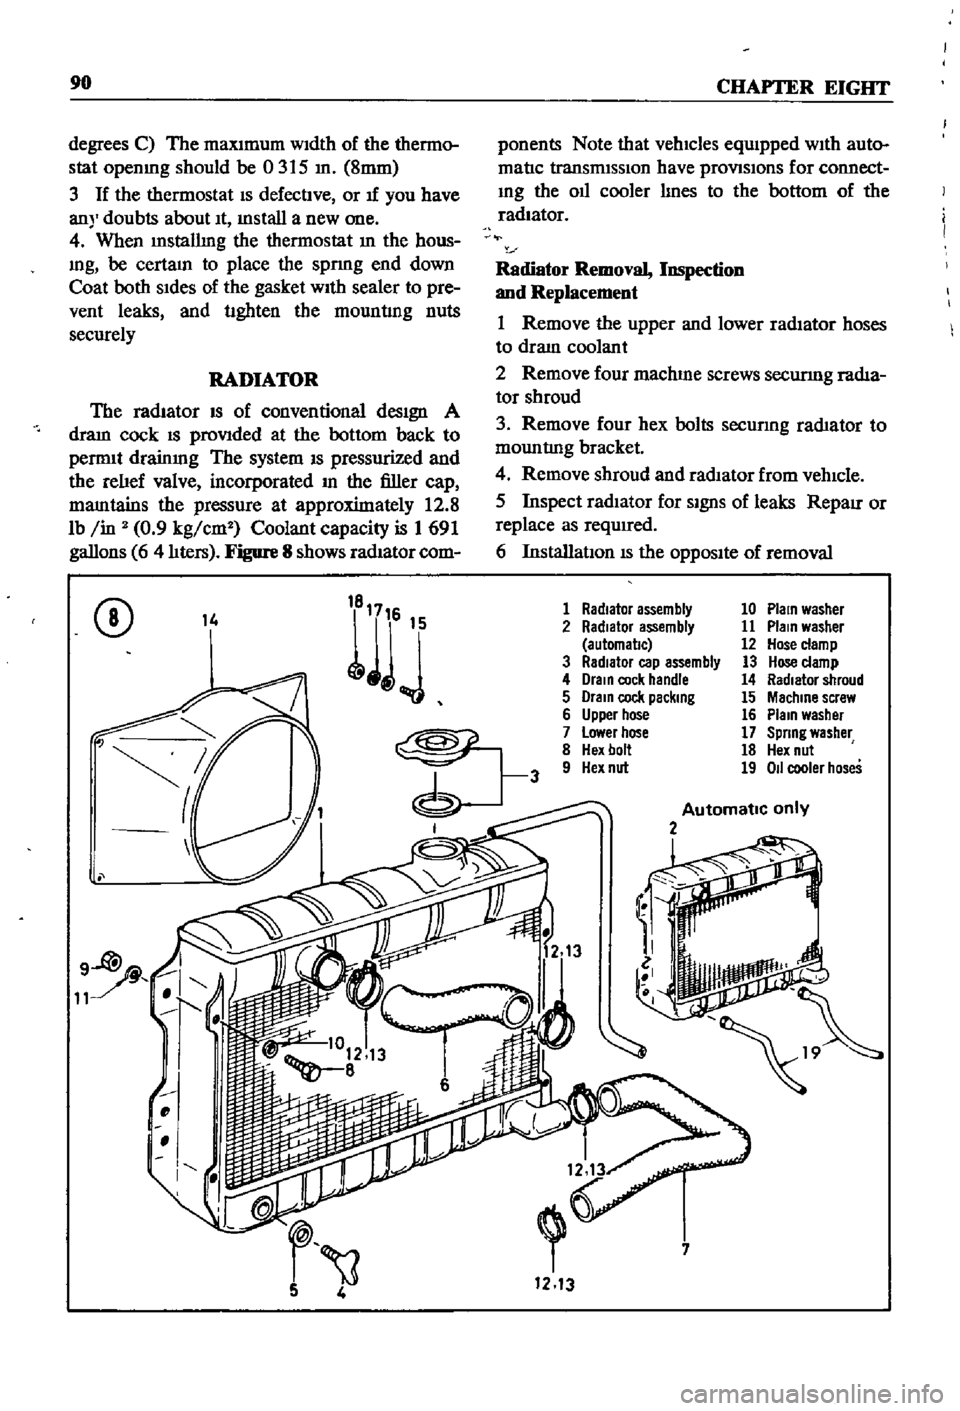 DATSUN 510 1968  Service Repair Manual 
90

CHAPTER

EIGHT

degrees 
C 
The 
maXImum 
WIdth 
of 
the 
thermo

stat

openIng 
should 
be 
0315 
In 
8mm

3 
If 
the 
thermostat 
IS 
defectIve 
or 
If

you 
have

an 
doubts 
about 
It 
mstall